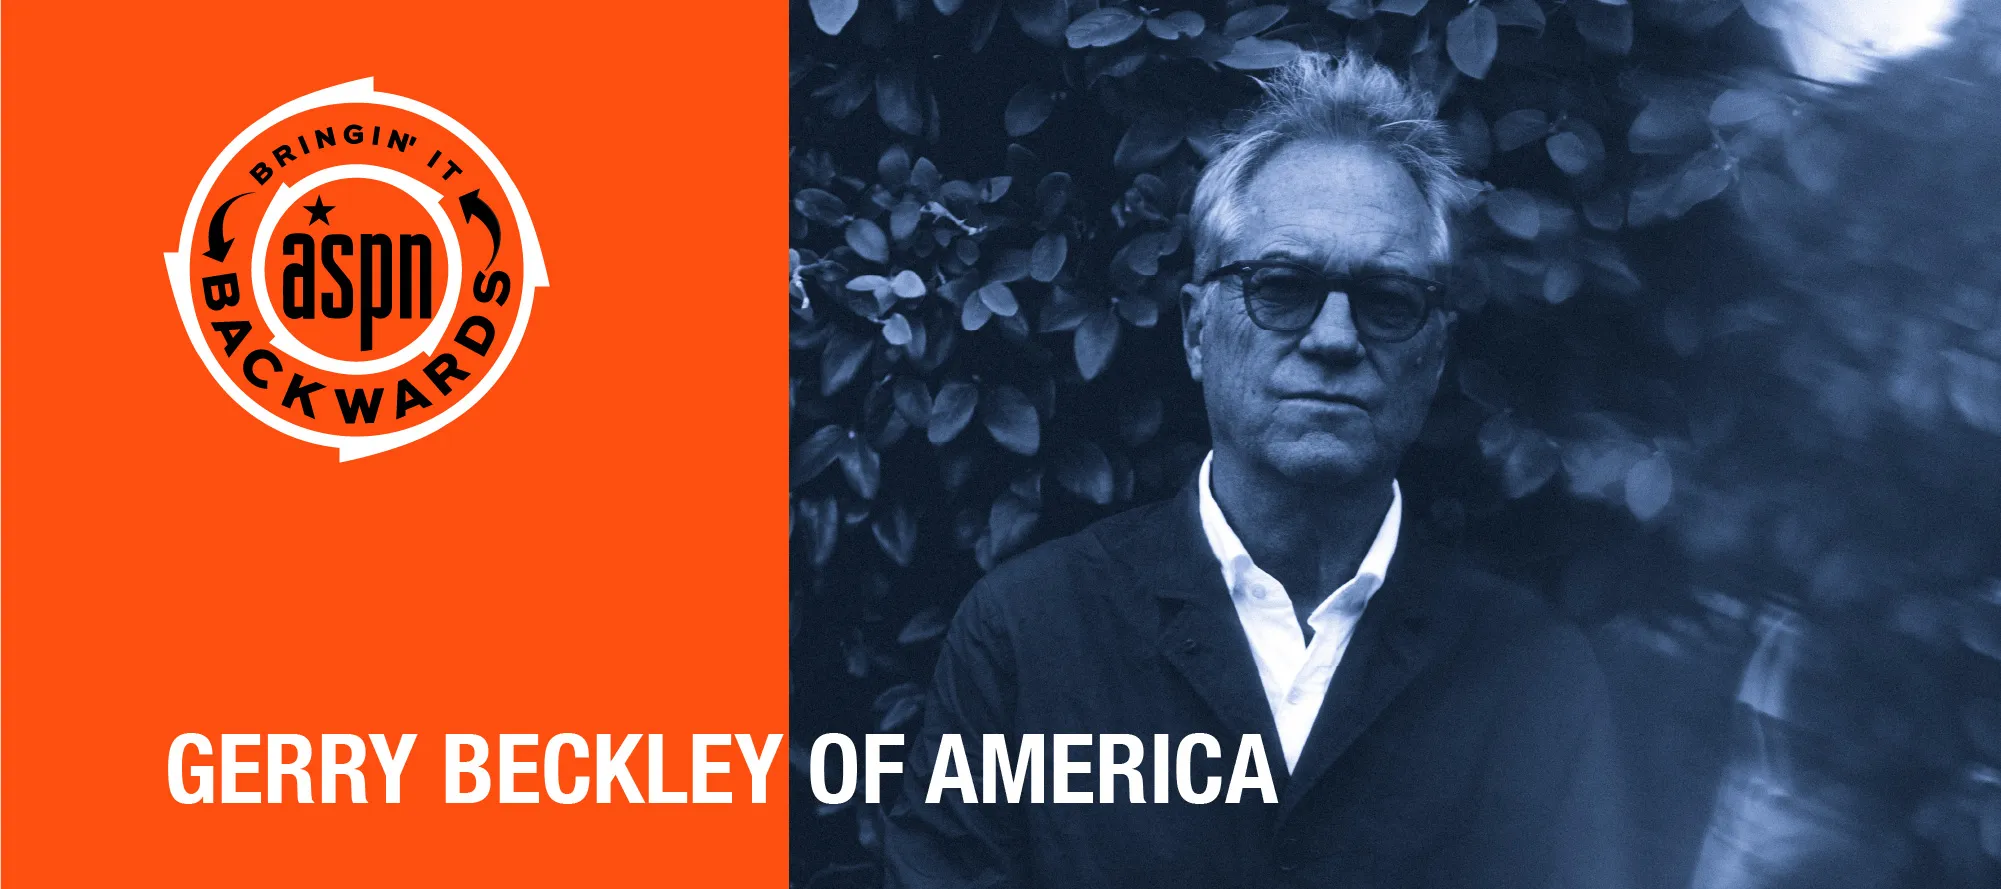 Bringin’ it Backwards: Interview with America (Gerry Beckley)